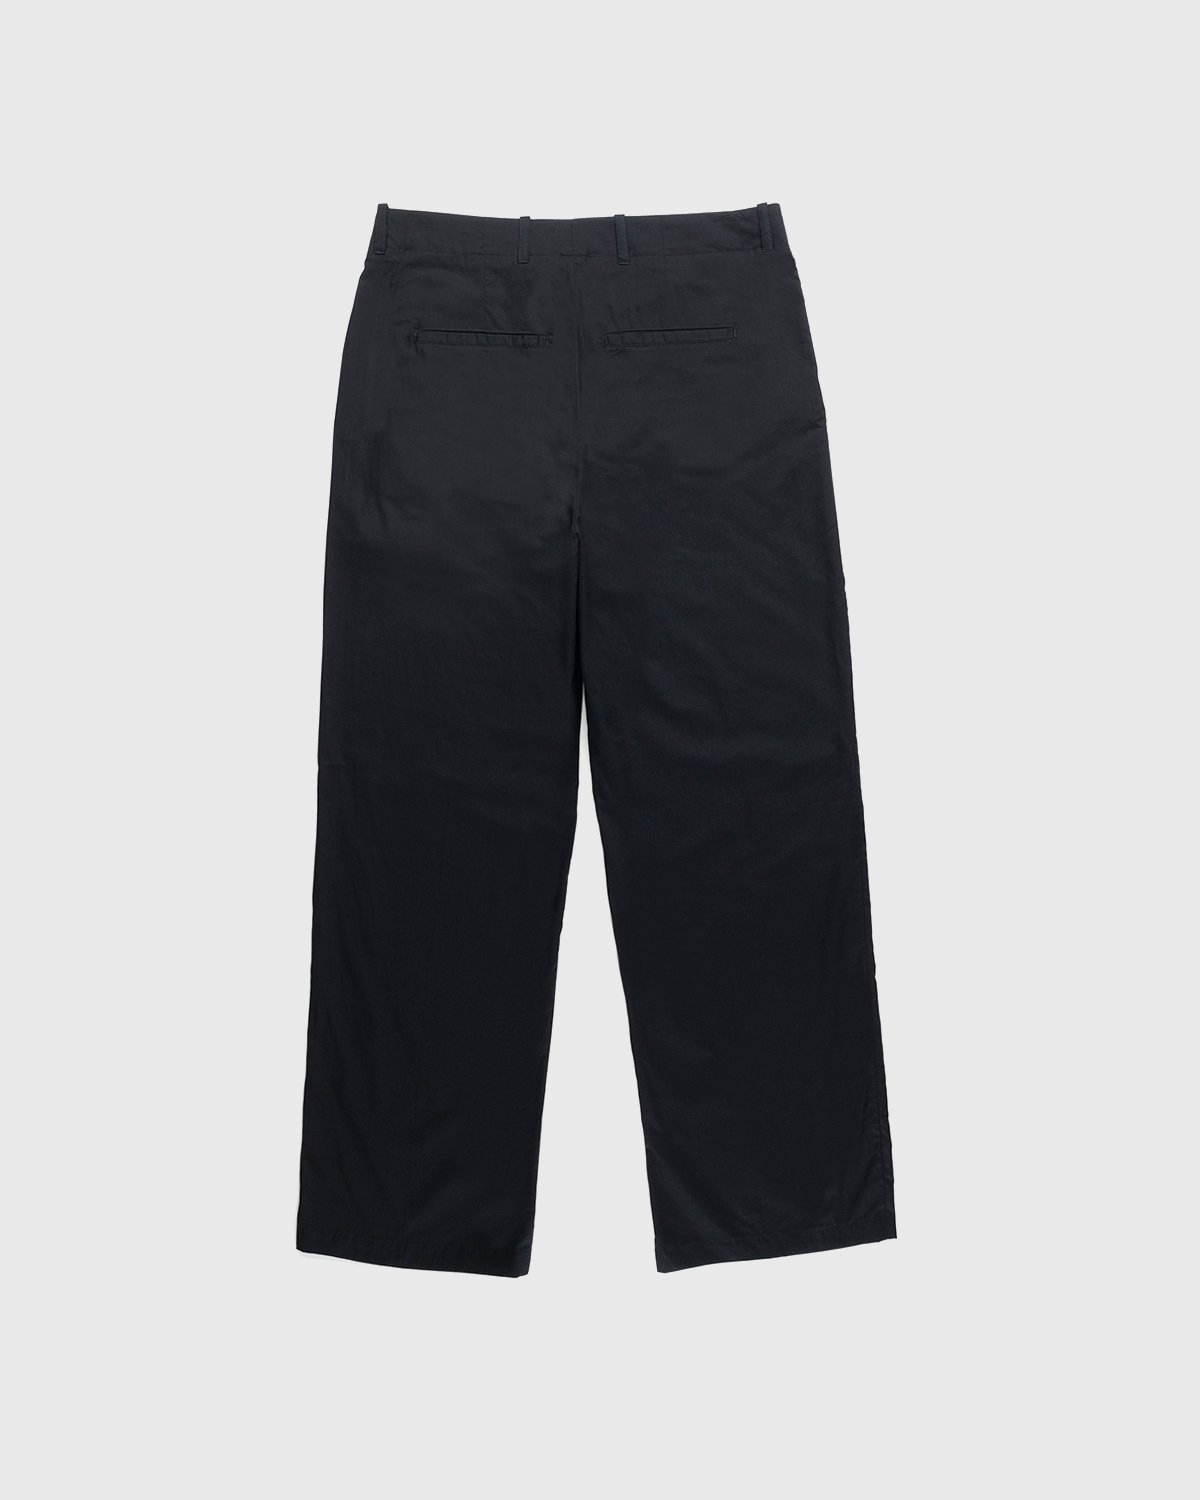 Our Legacy - Borrowed Chino Black Voile - Clothing - Black - Image 2